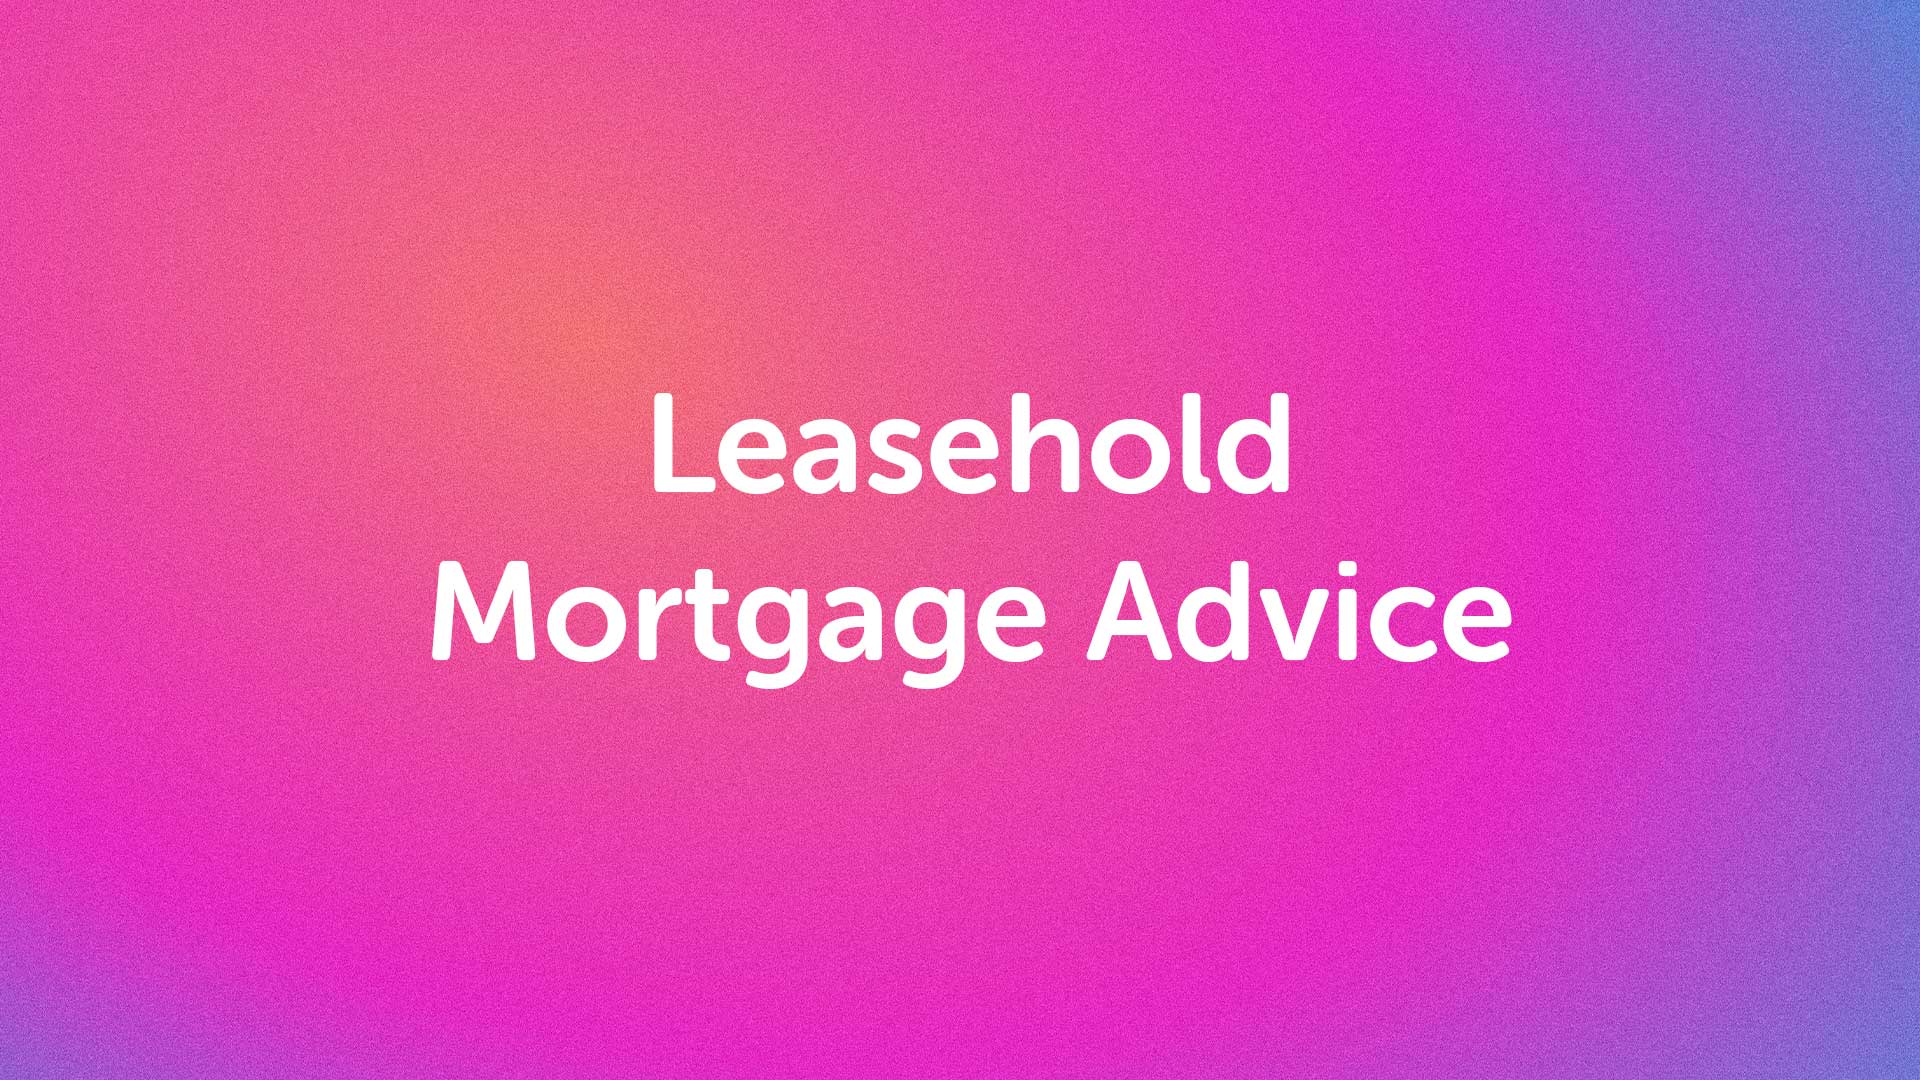 Leasehold Mortgage Advice in Manchester | Manchestermoneyman